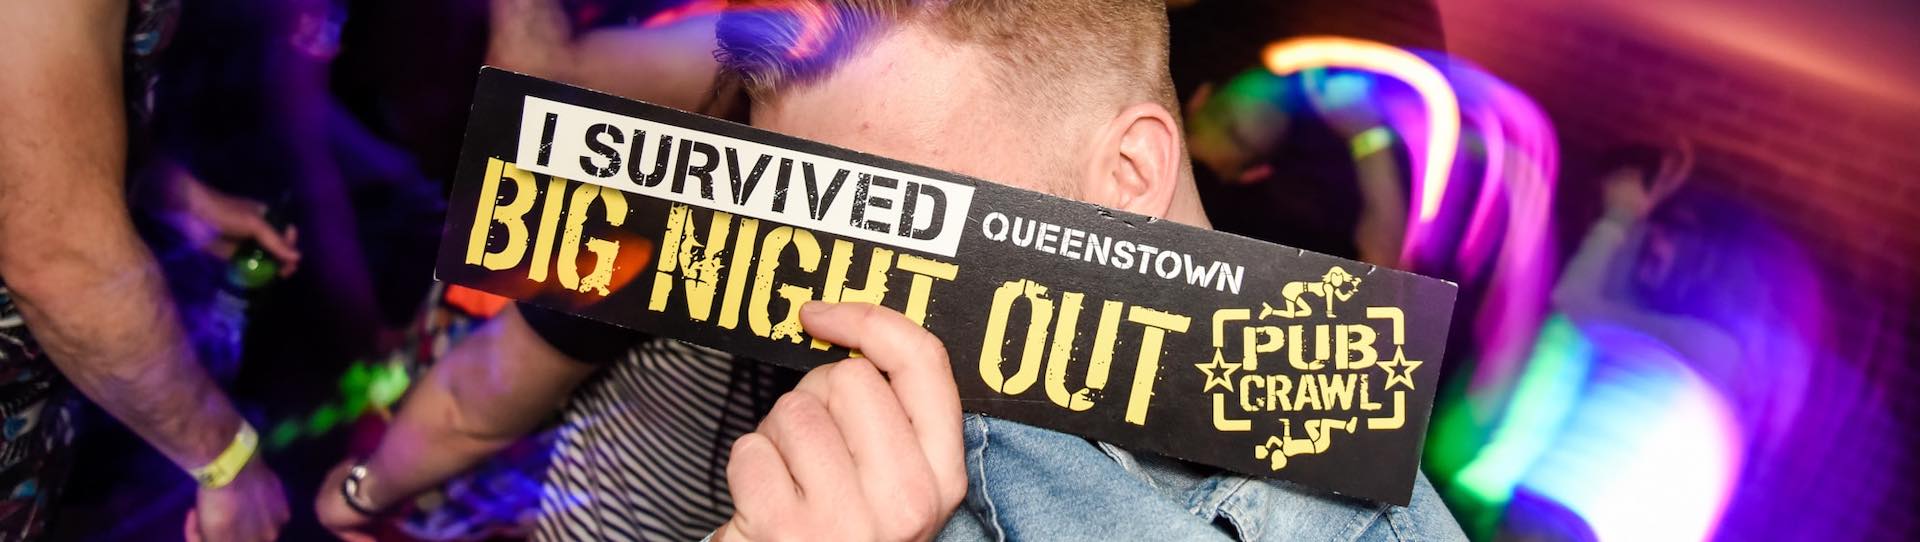 Lad holding I survived the Big Night Out Pub Crawl Queenstown sign with glow stick lights behind him